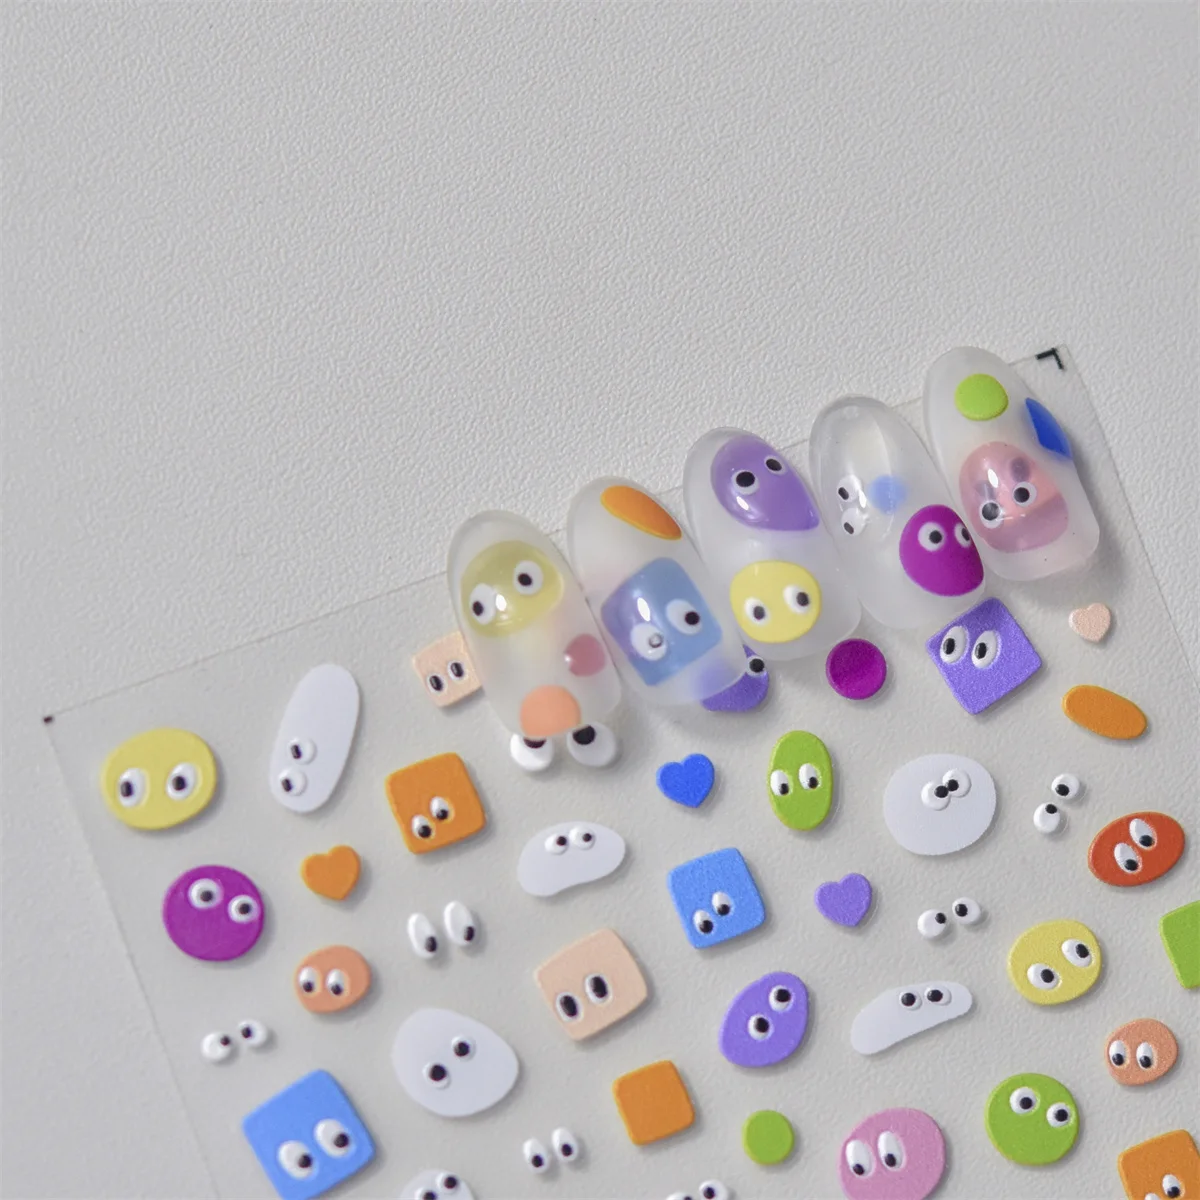 1pcs 5D Relief Colorful Rainbow Clouds Nail Art Stickers Cherry Fruit Adhesive Decals Decorations Transfer Charms Accessories